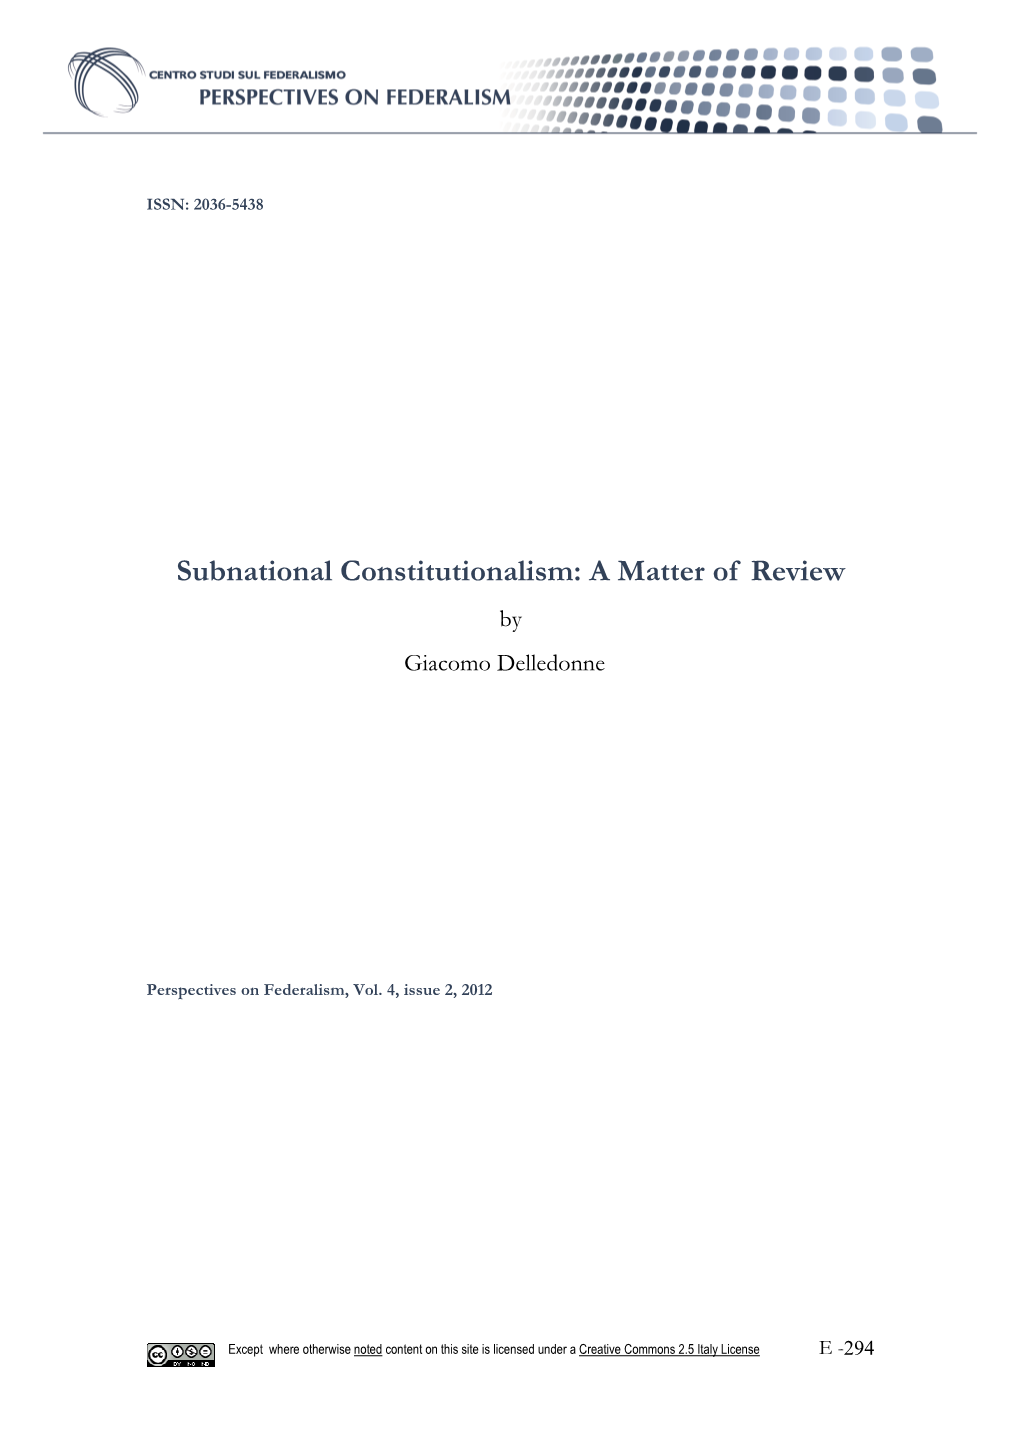 Subnational Constitutionalism: a Matter of Review by Giacomo Delledonne ∗